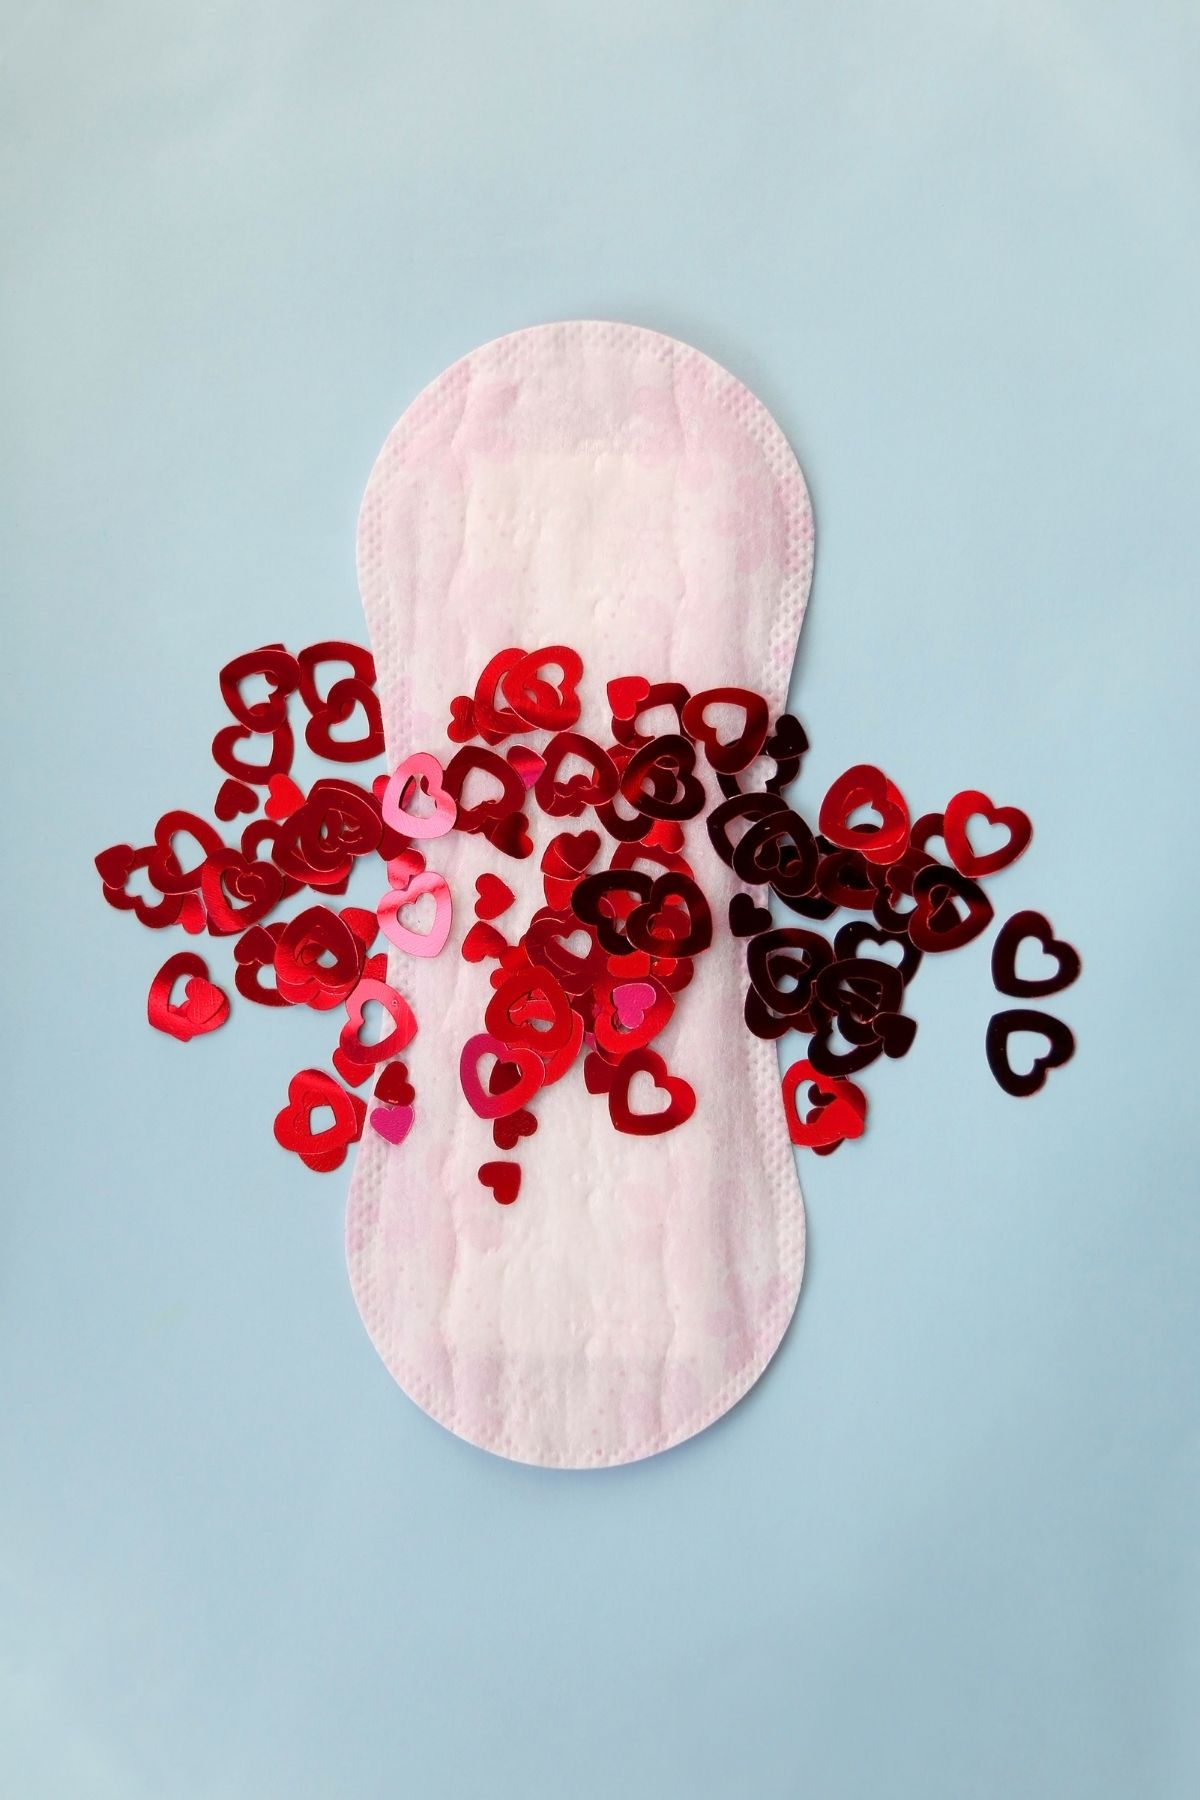 Sanitary pad with tiny red heart cutouts scattered over surface to represent blood.